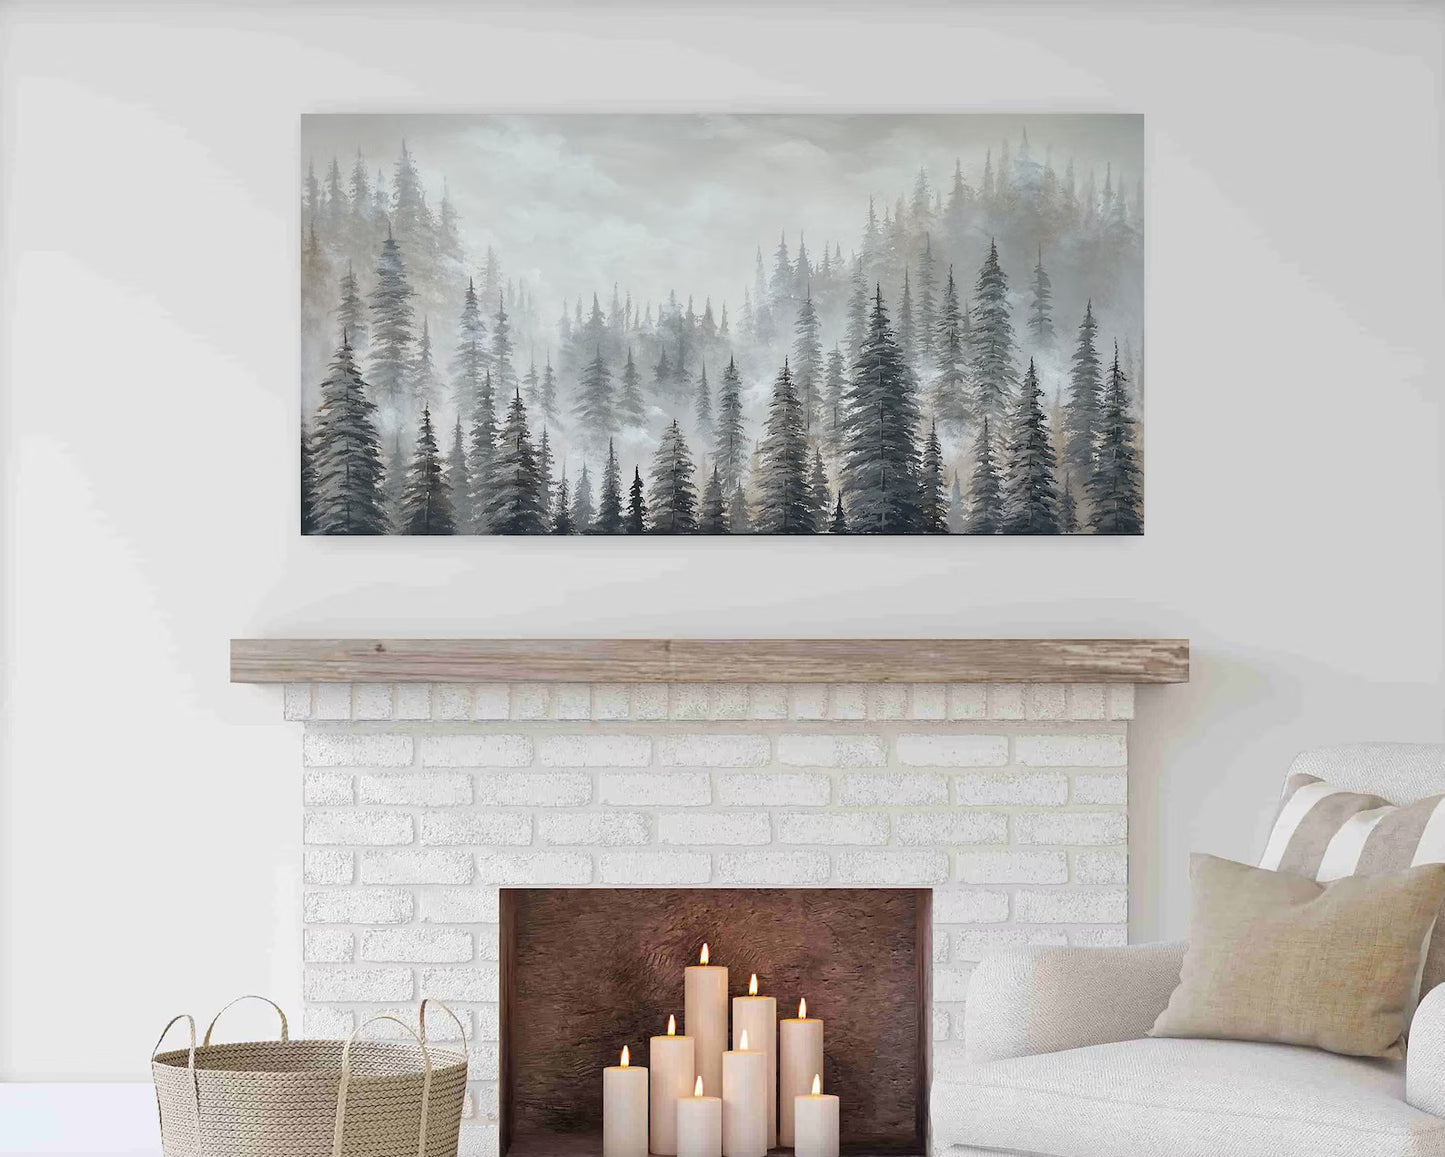 Original Painting art "Enveloped in Tranquility: Pine Forest in Autumn Mist" hand-painted canvas wrapped for living room bedroom home decor